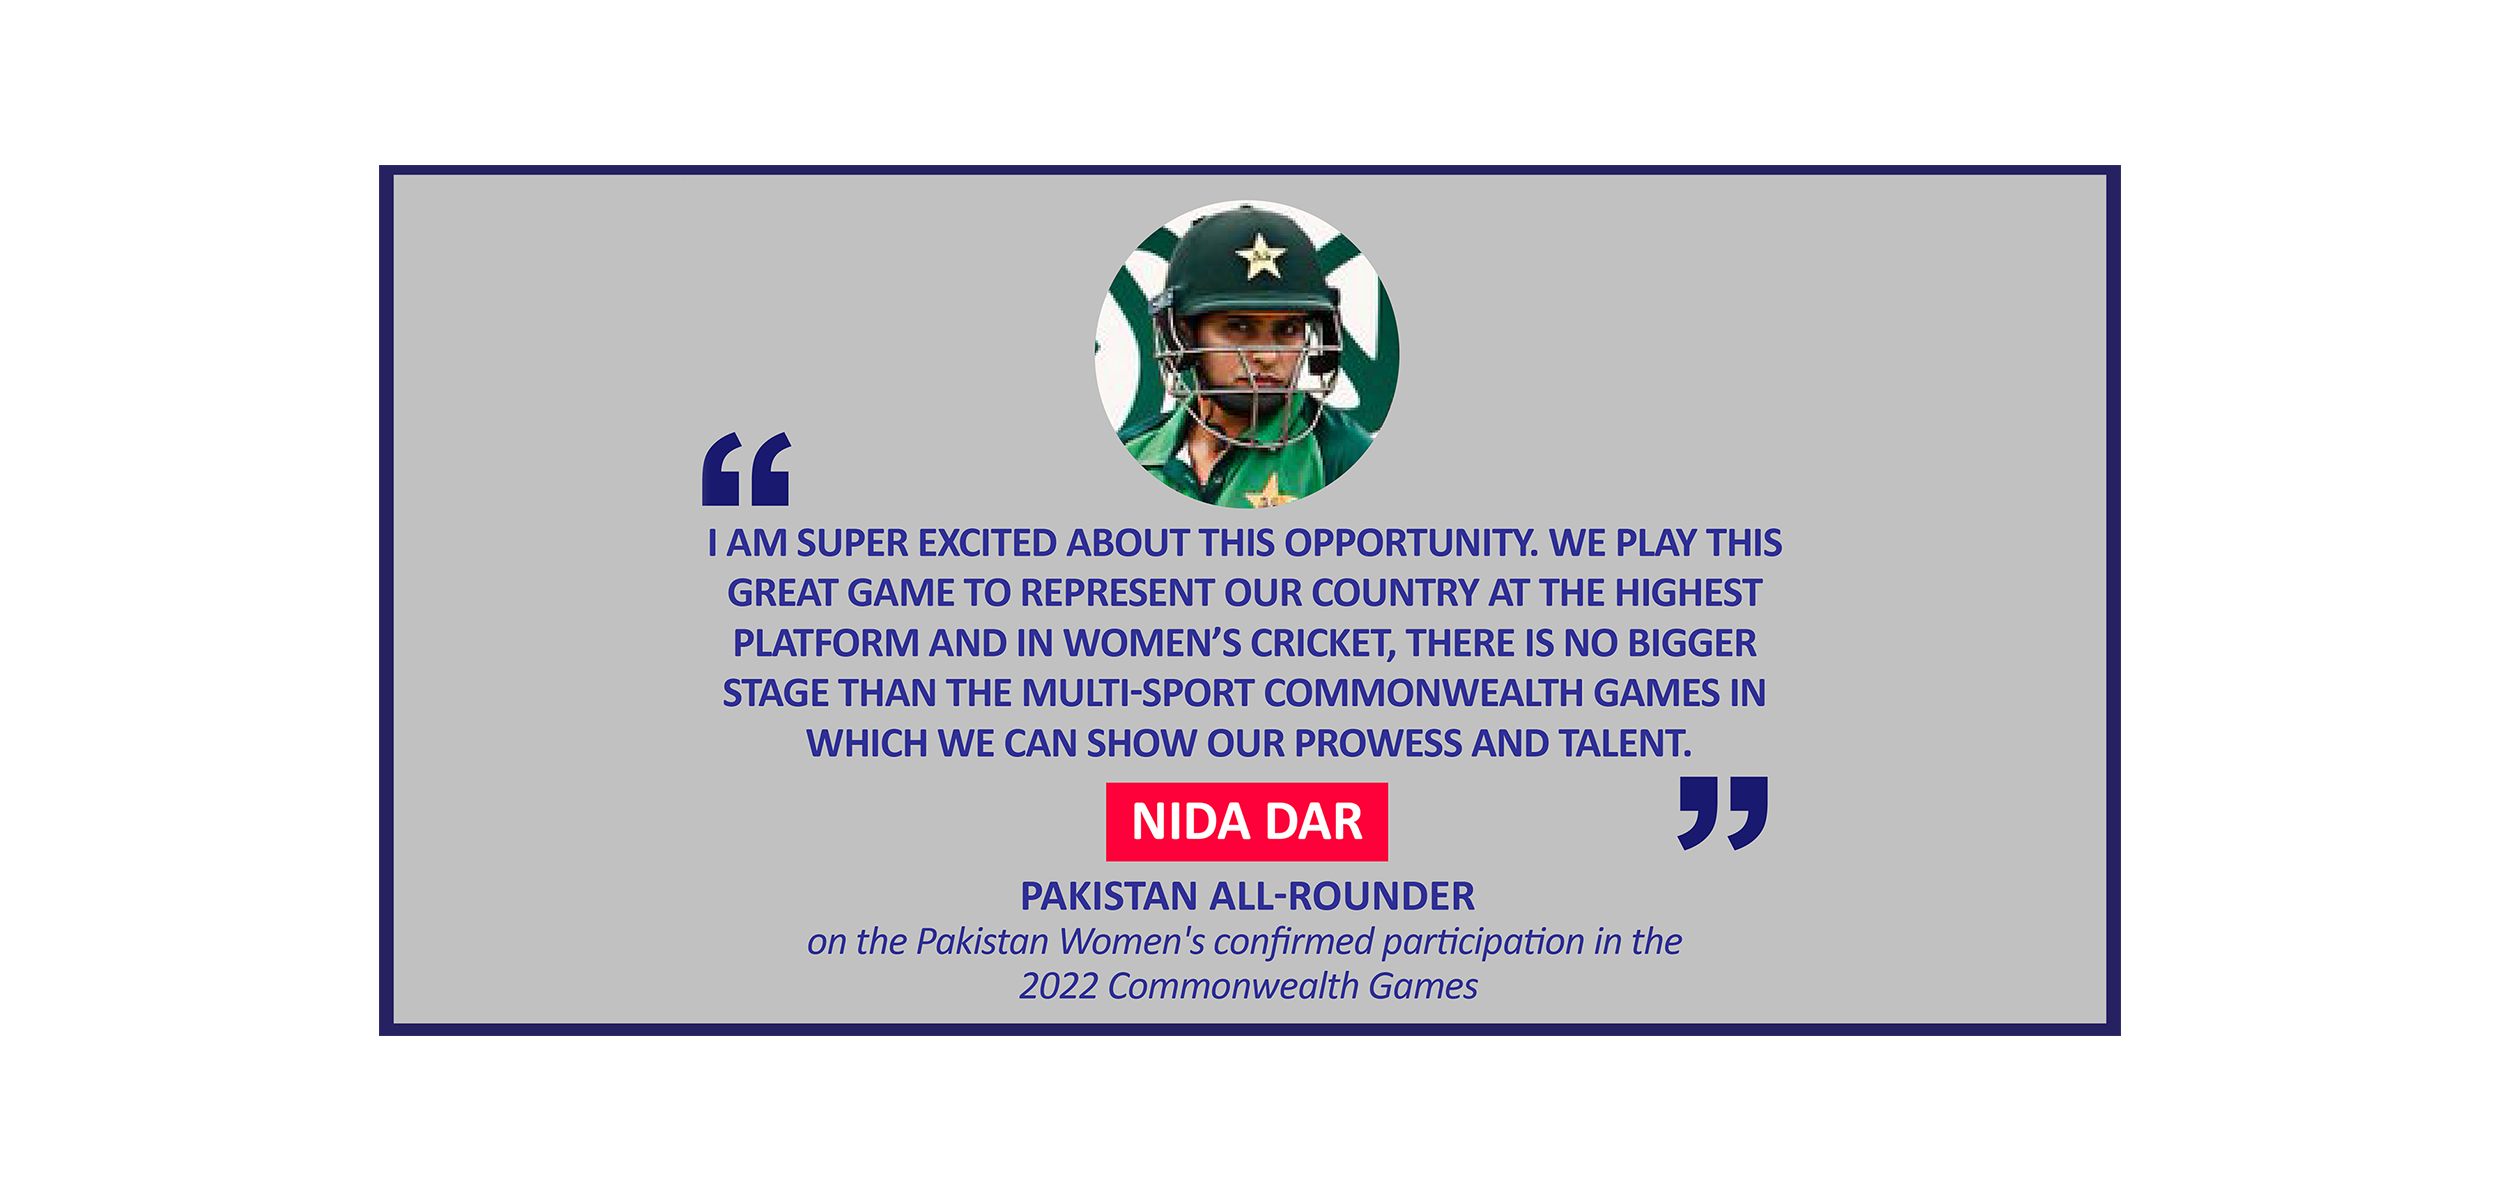 Nida Dar, Pakistan all-rounder on the Pakistan Women's confirmed participation in the 2022 Commonwealth Games